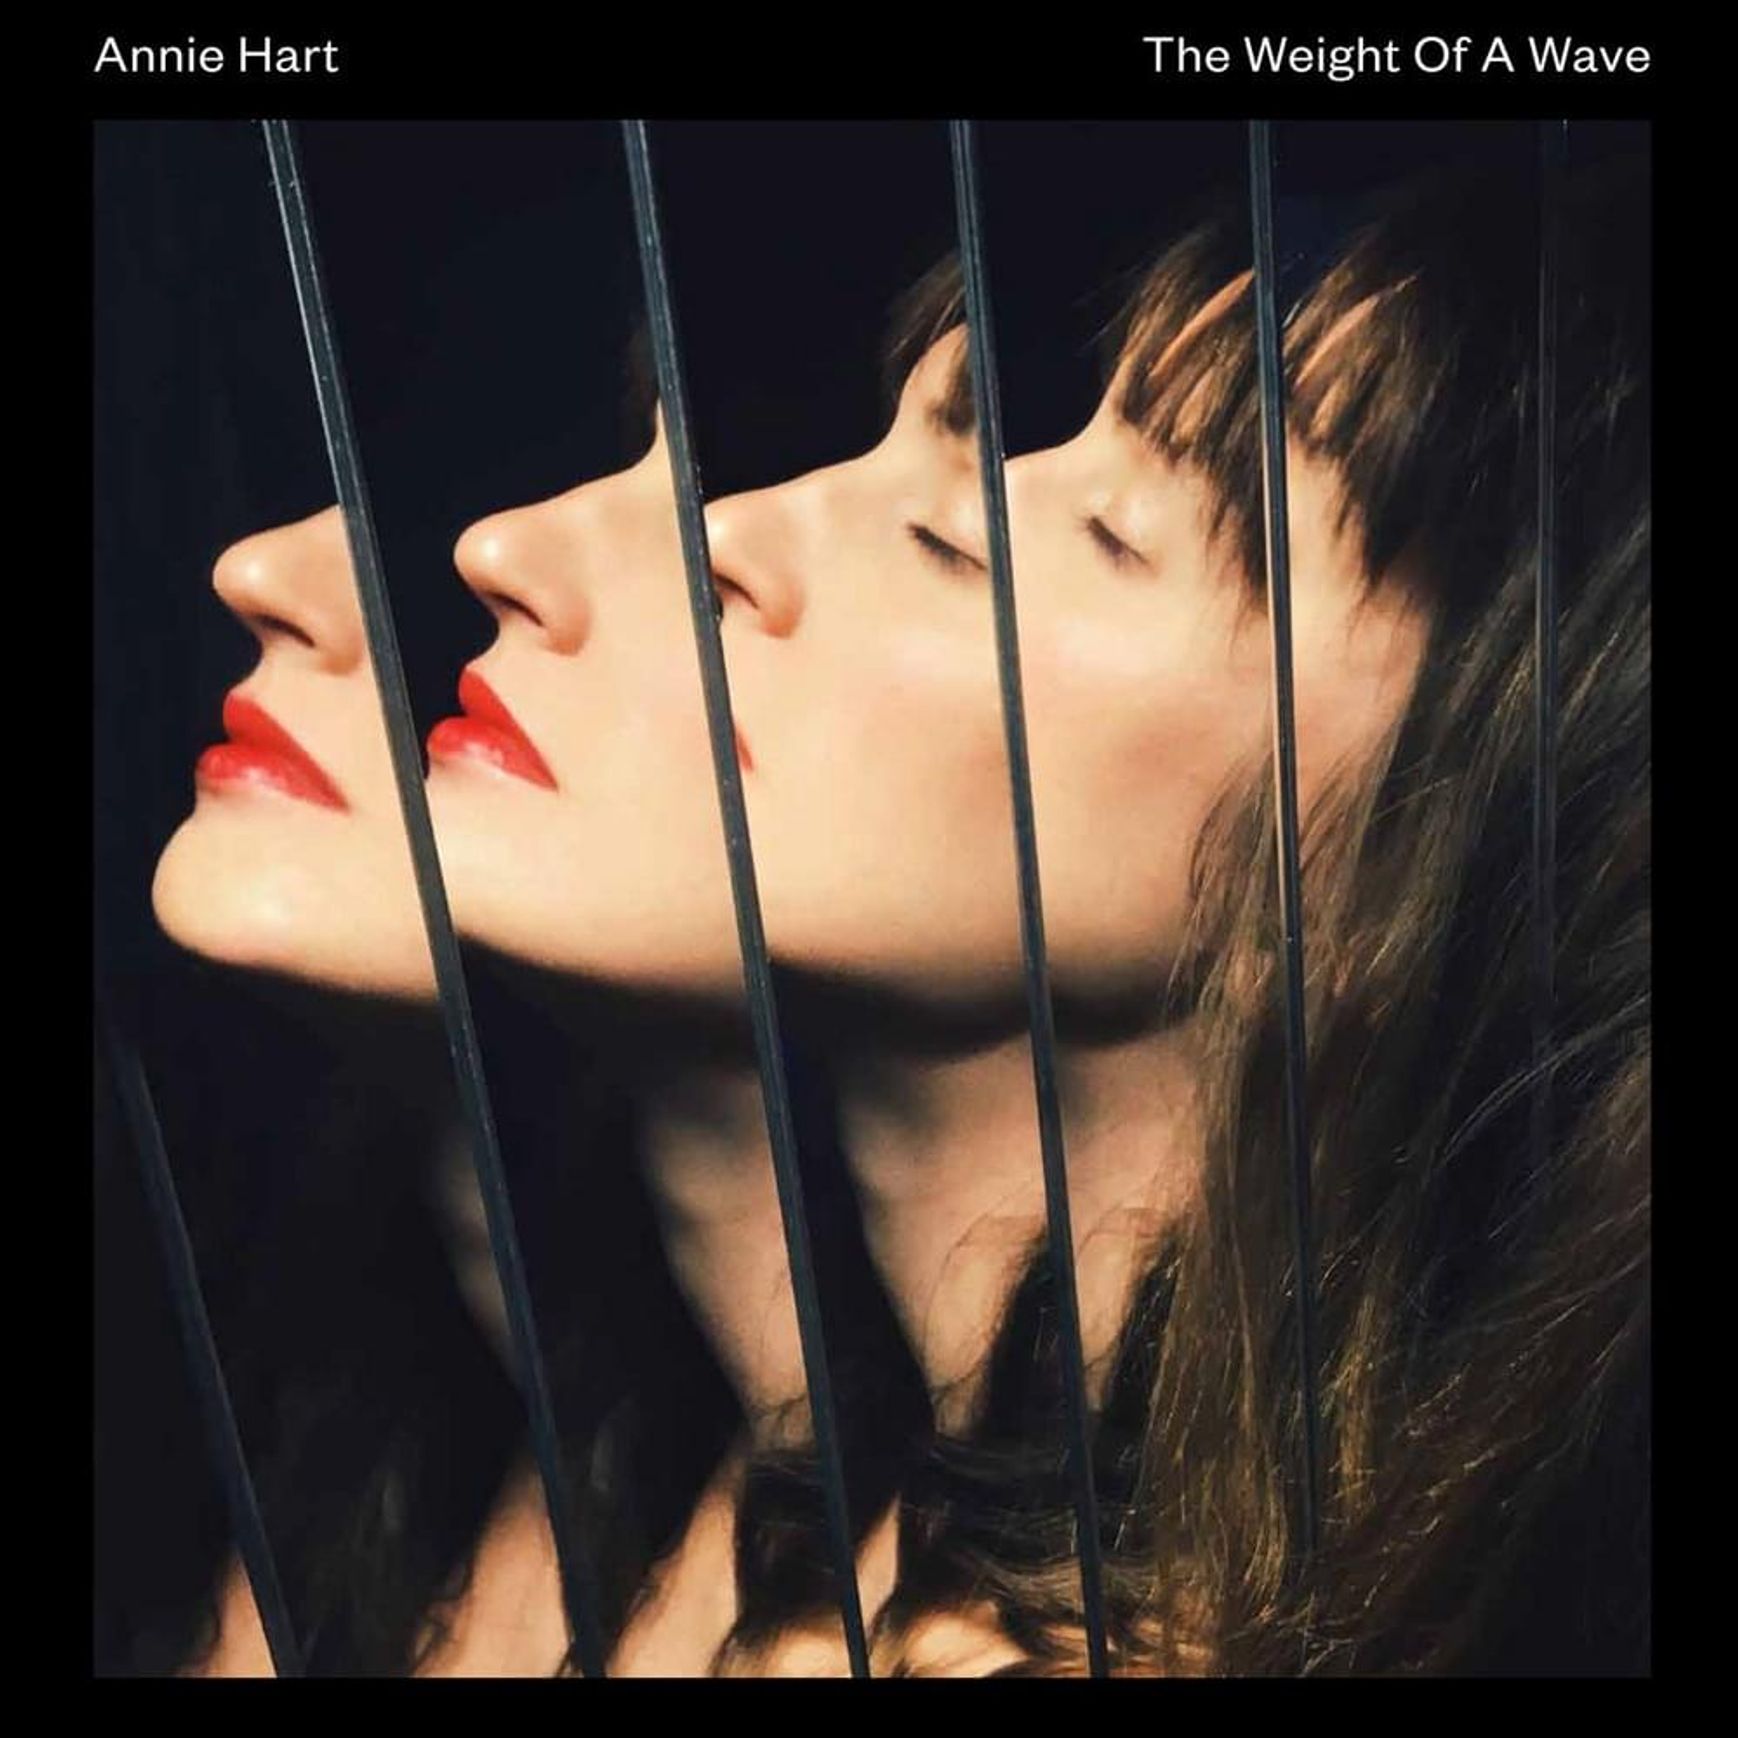 Annie Hart, The Weight of a Wave Album Download Leak MP3 ZIP Files